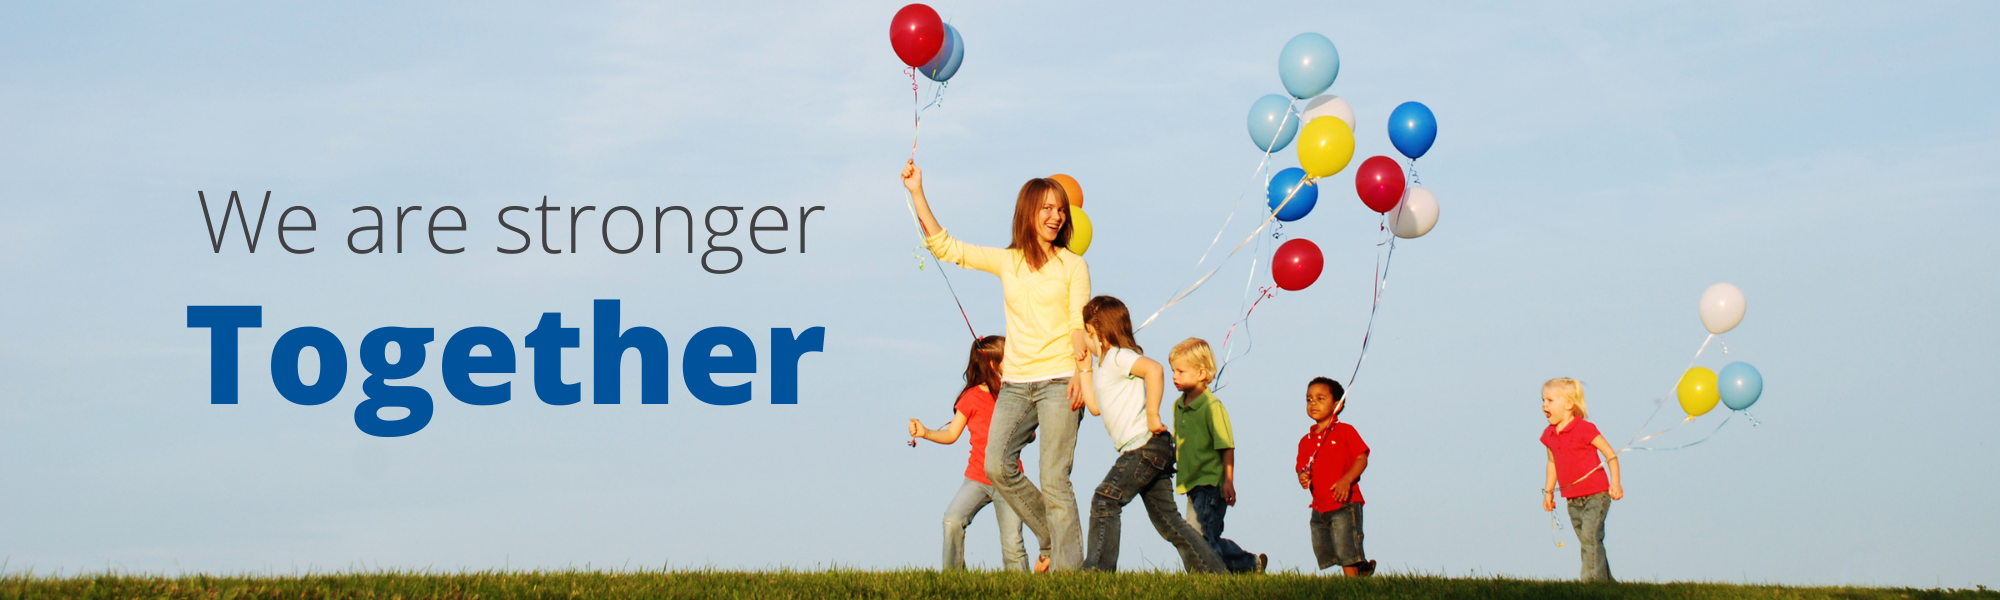 An adult leads a group of children, all hold balloons. The text overlaid on the image reads "We are Stronger Together."